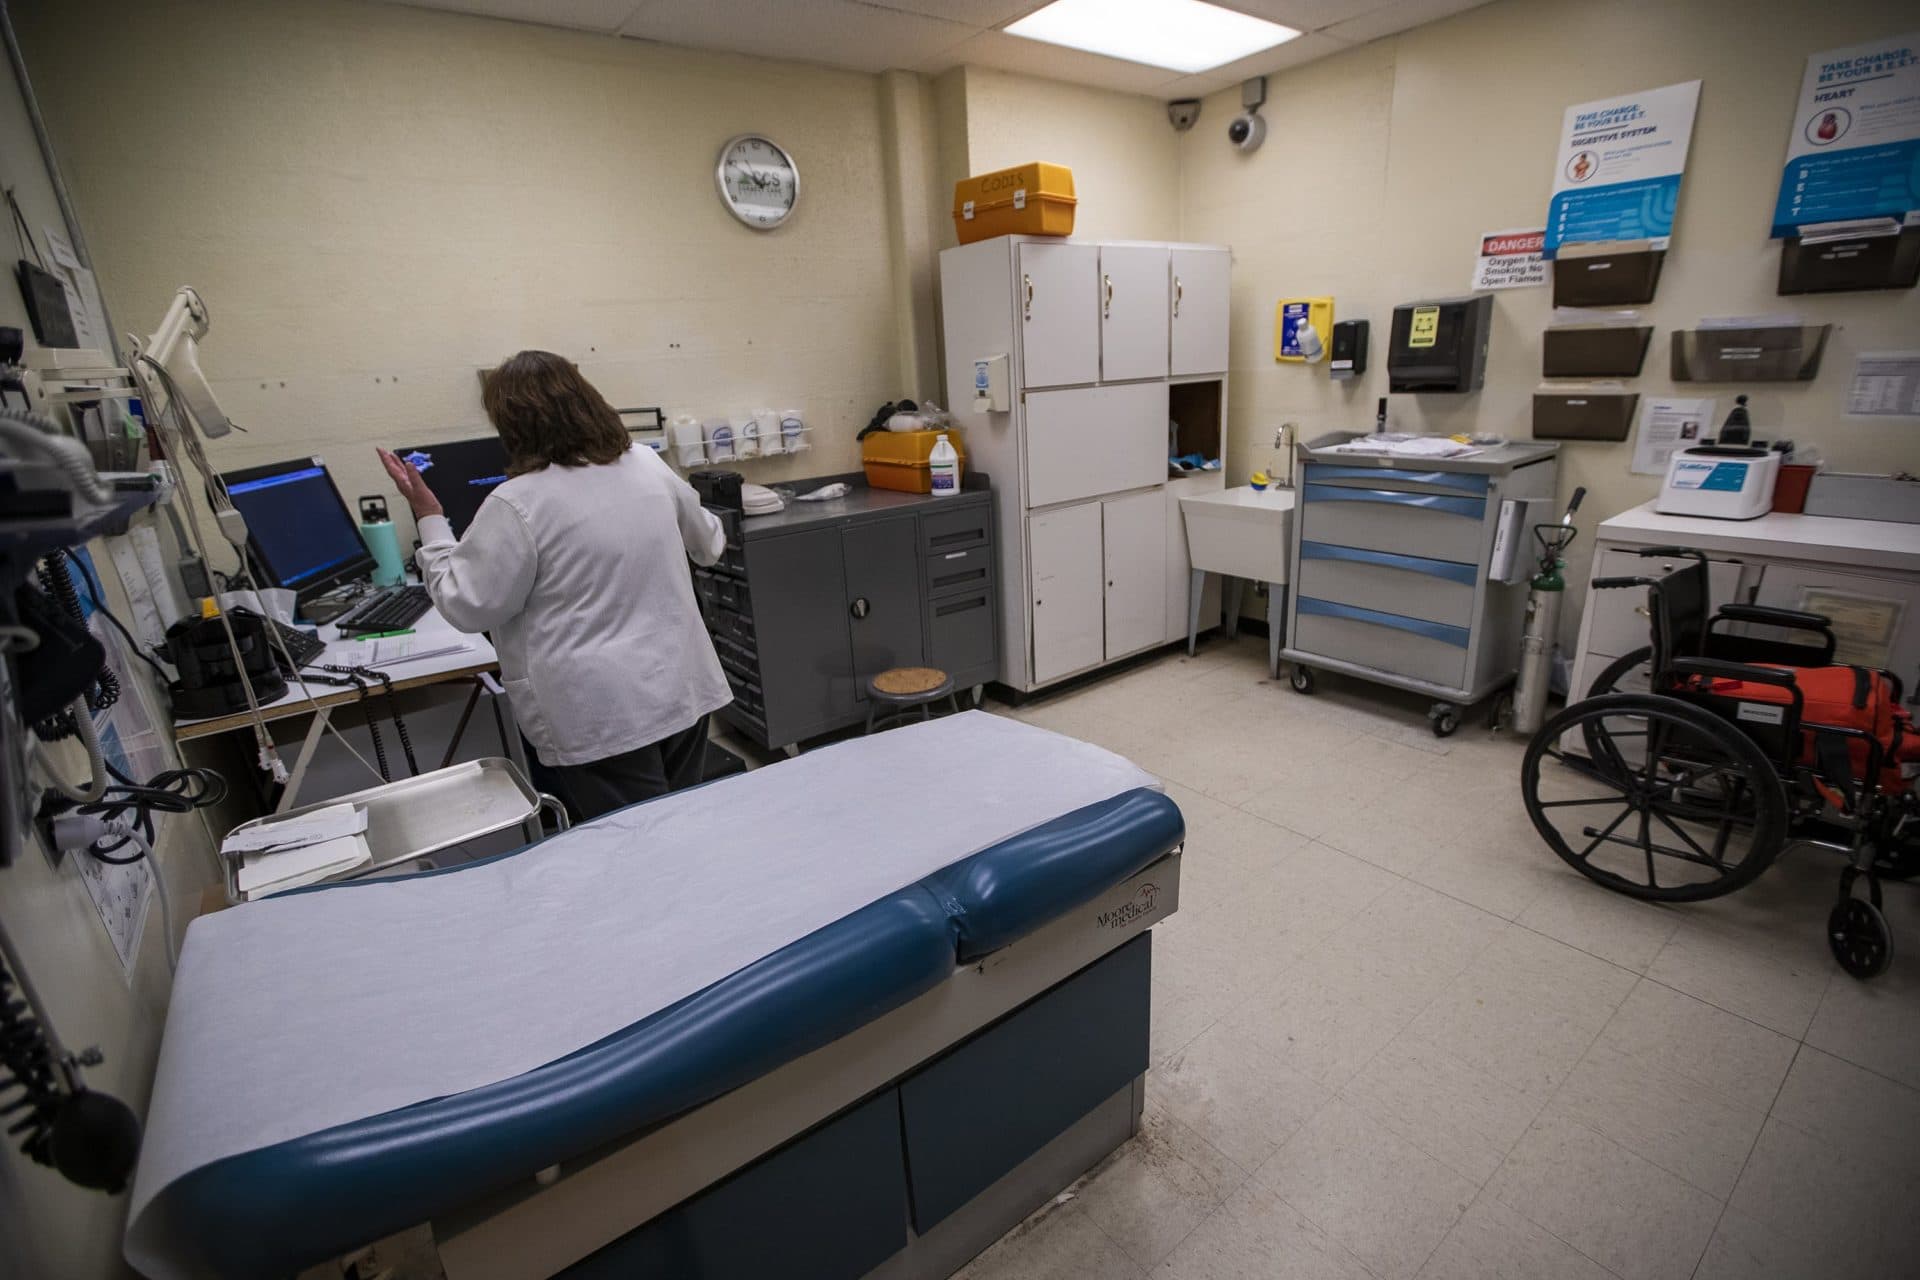 A medical exam room in the Worcester County jail in West Boylston. (Jesse Costa/WBUR)